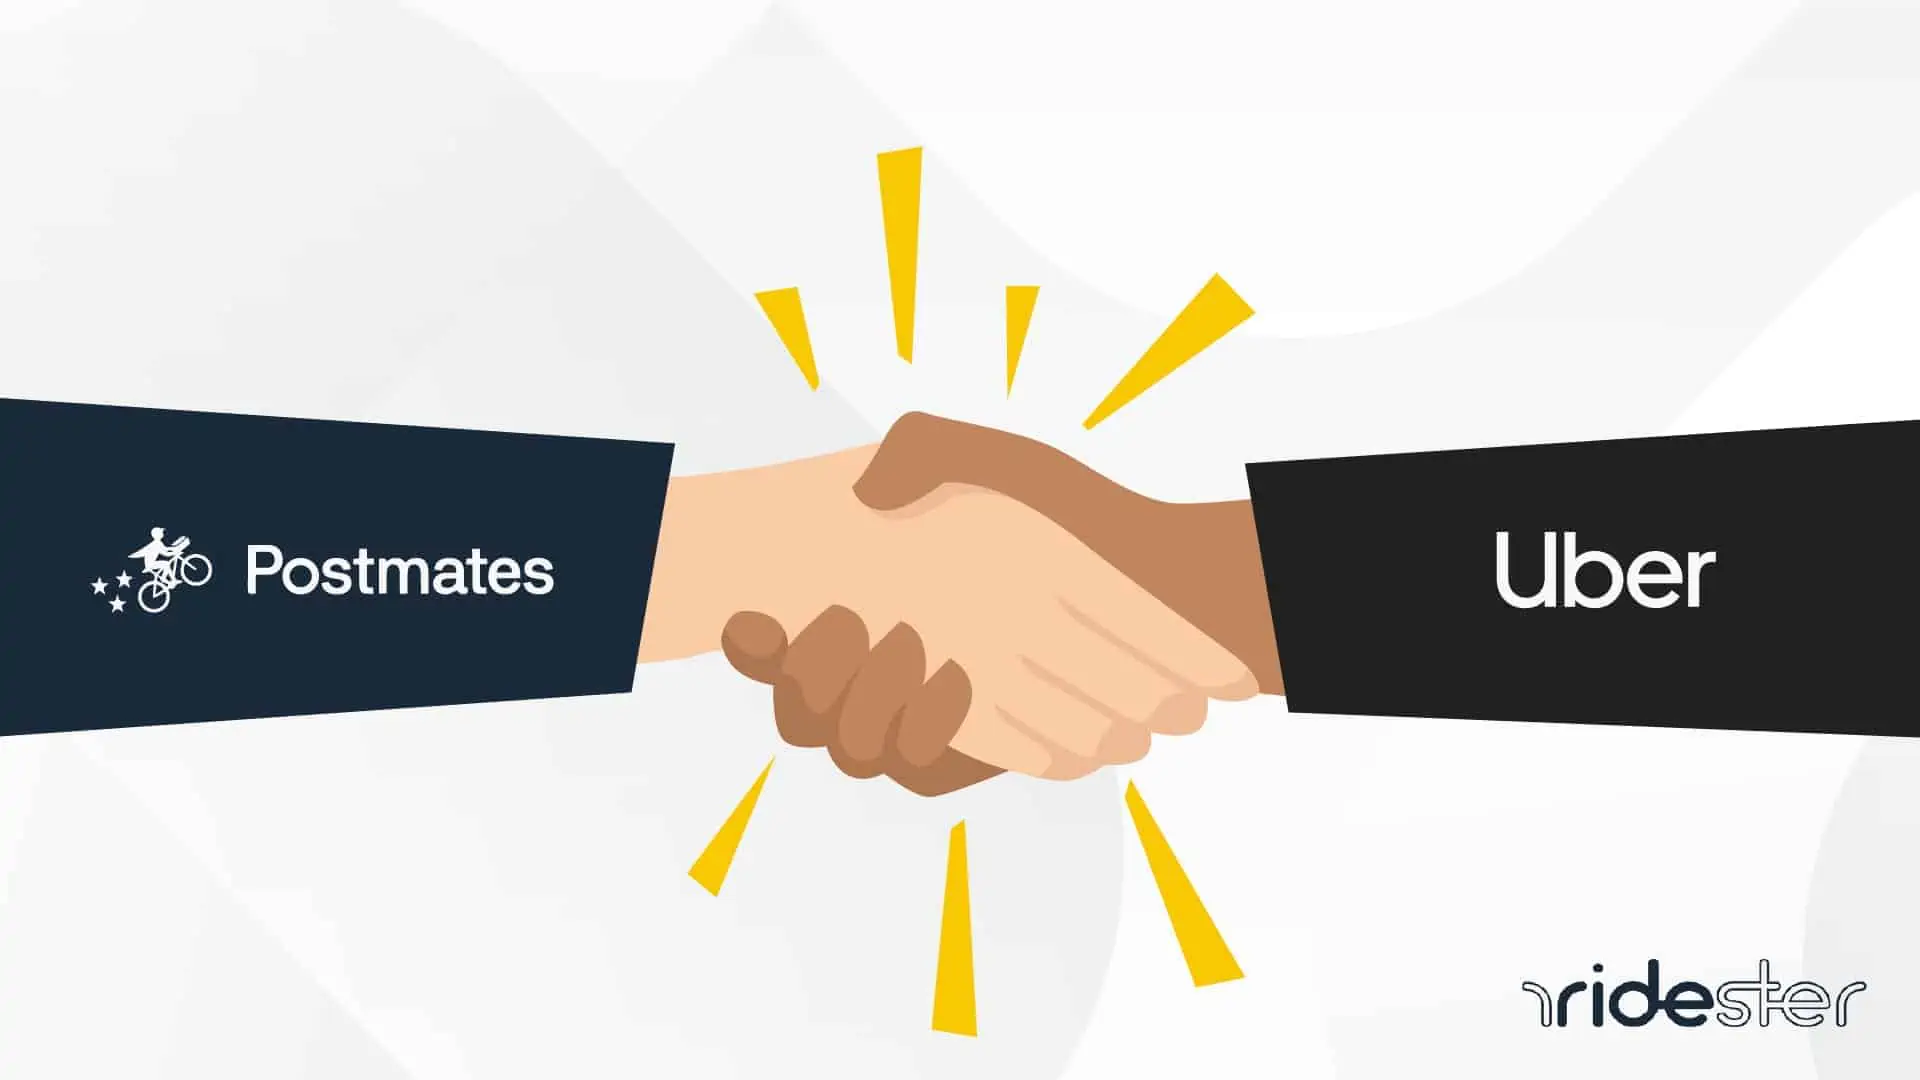 header image for uber buys postmates blog post showing an uber logo and postmates logo on wrists of two hands shaking